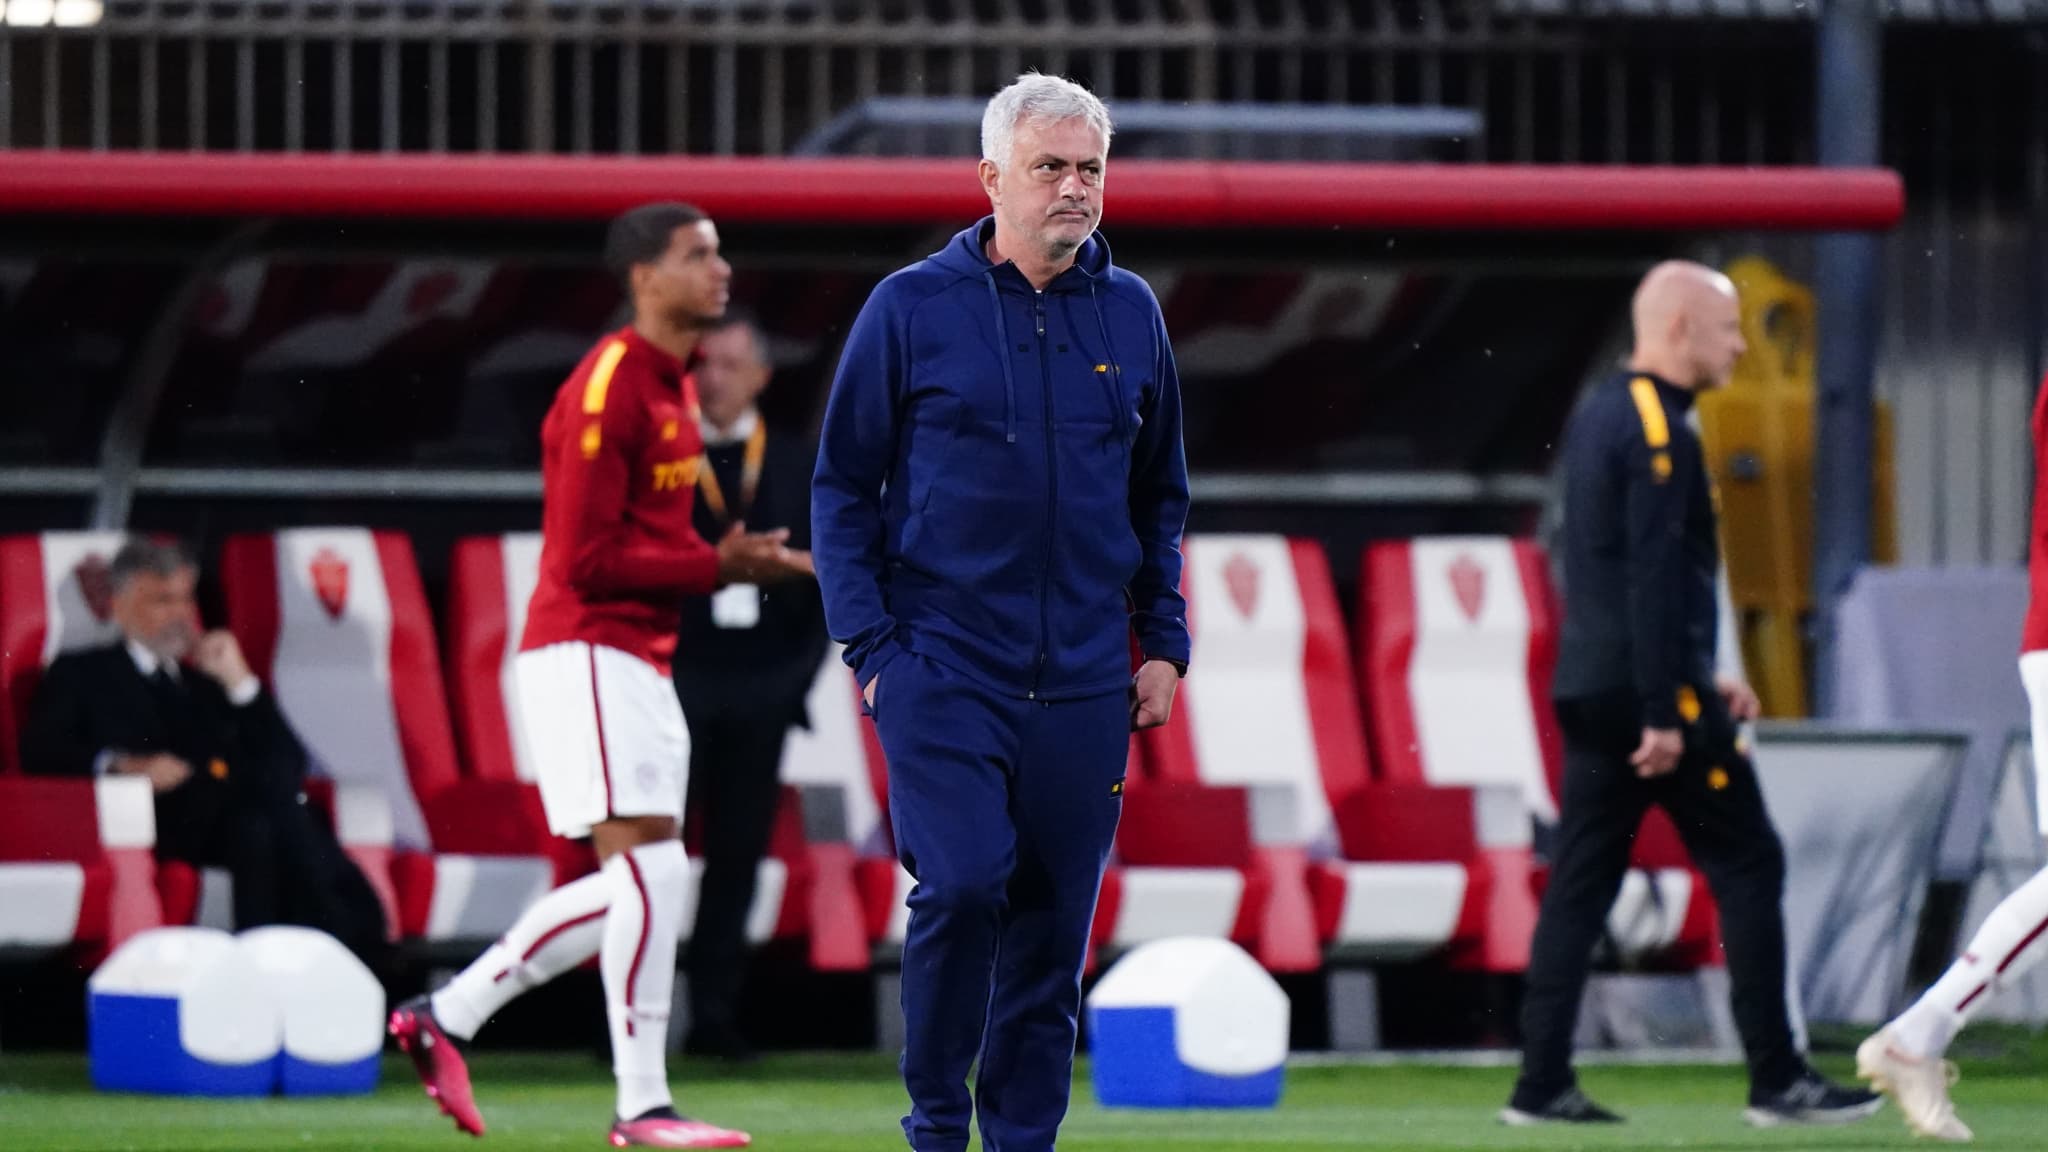 Jose Mourinho, who has already been suspended by UEFA, has also been suspended in Serie A